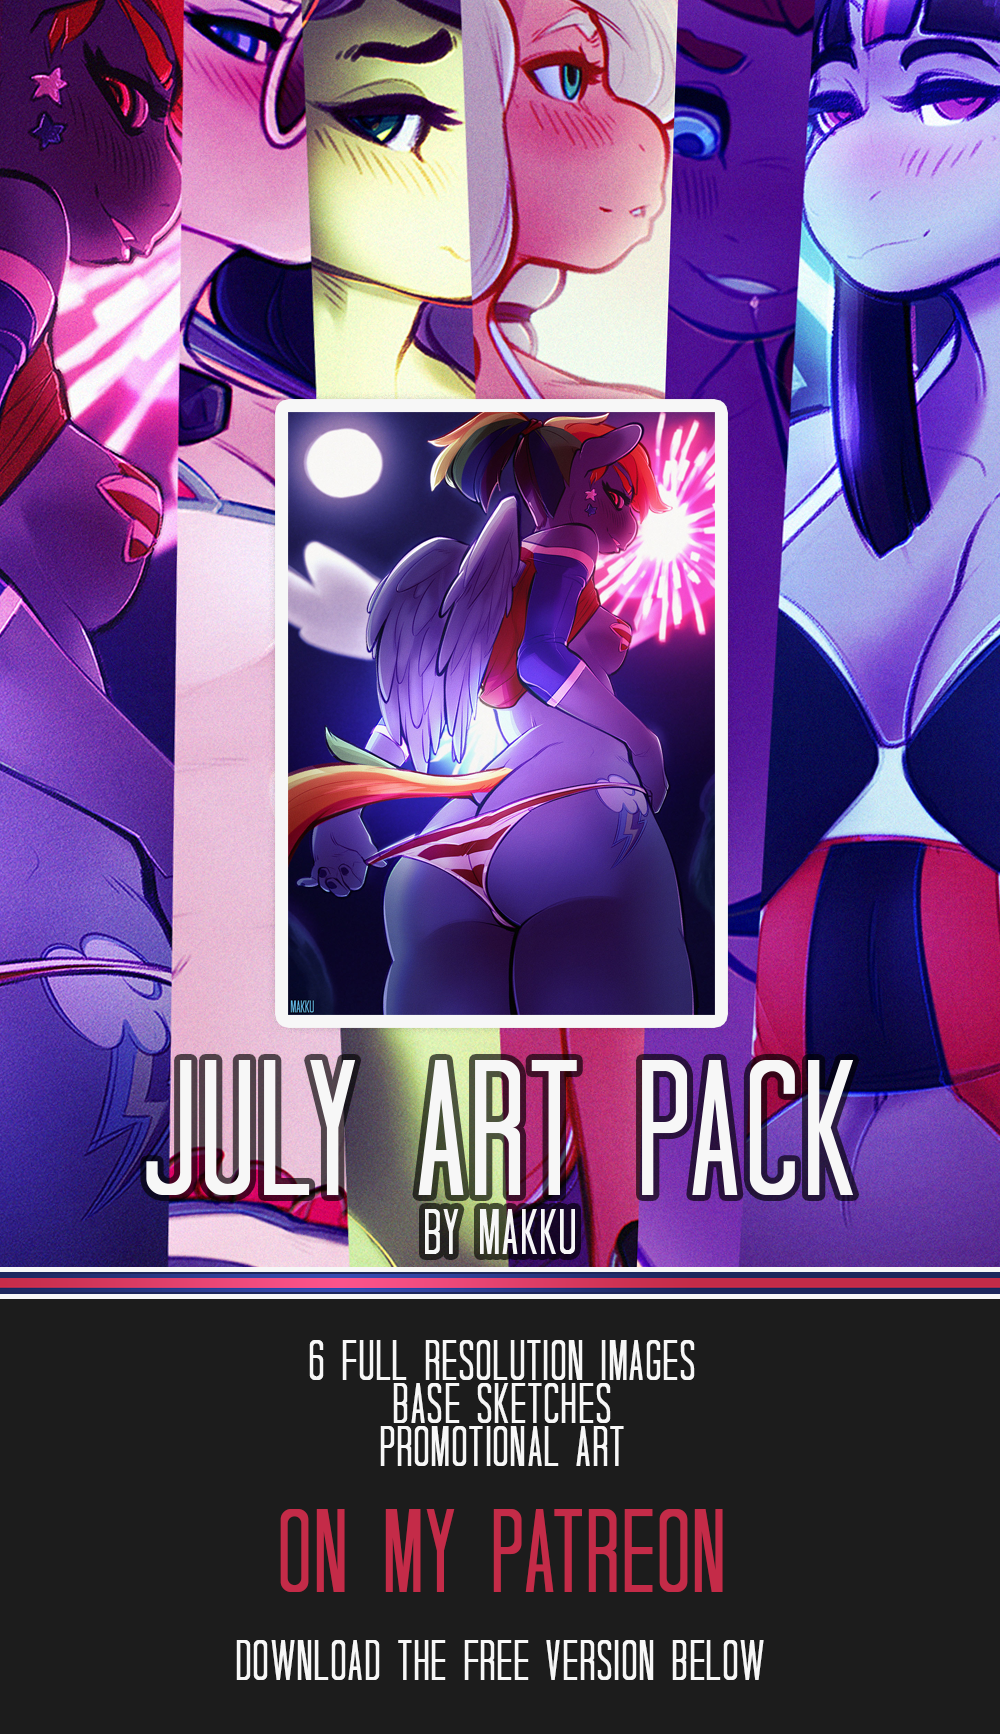 its-makku: My 4th of July Art Pack Is Up! My first art pack is finally up! I decided